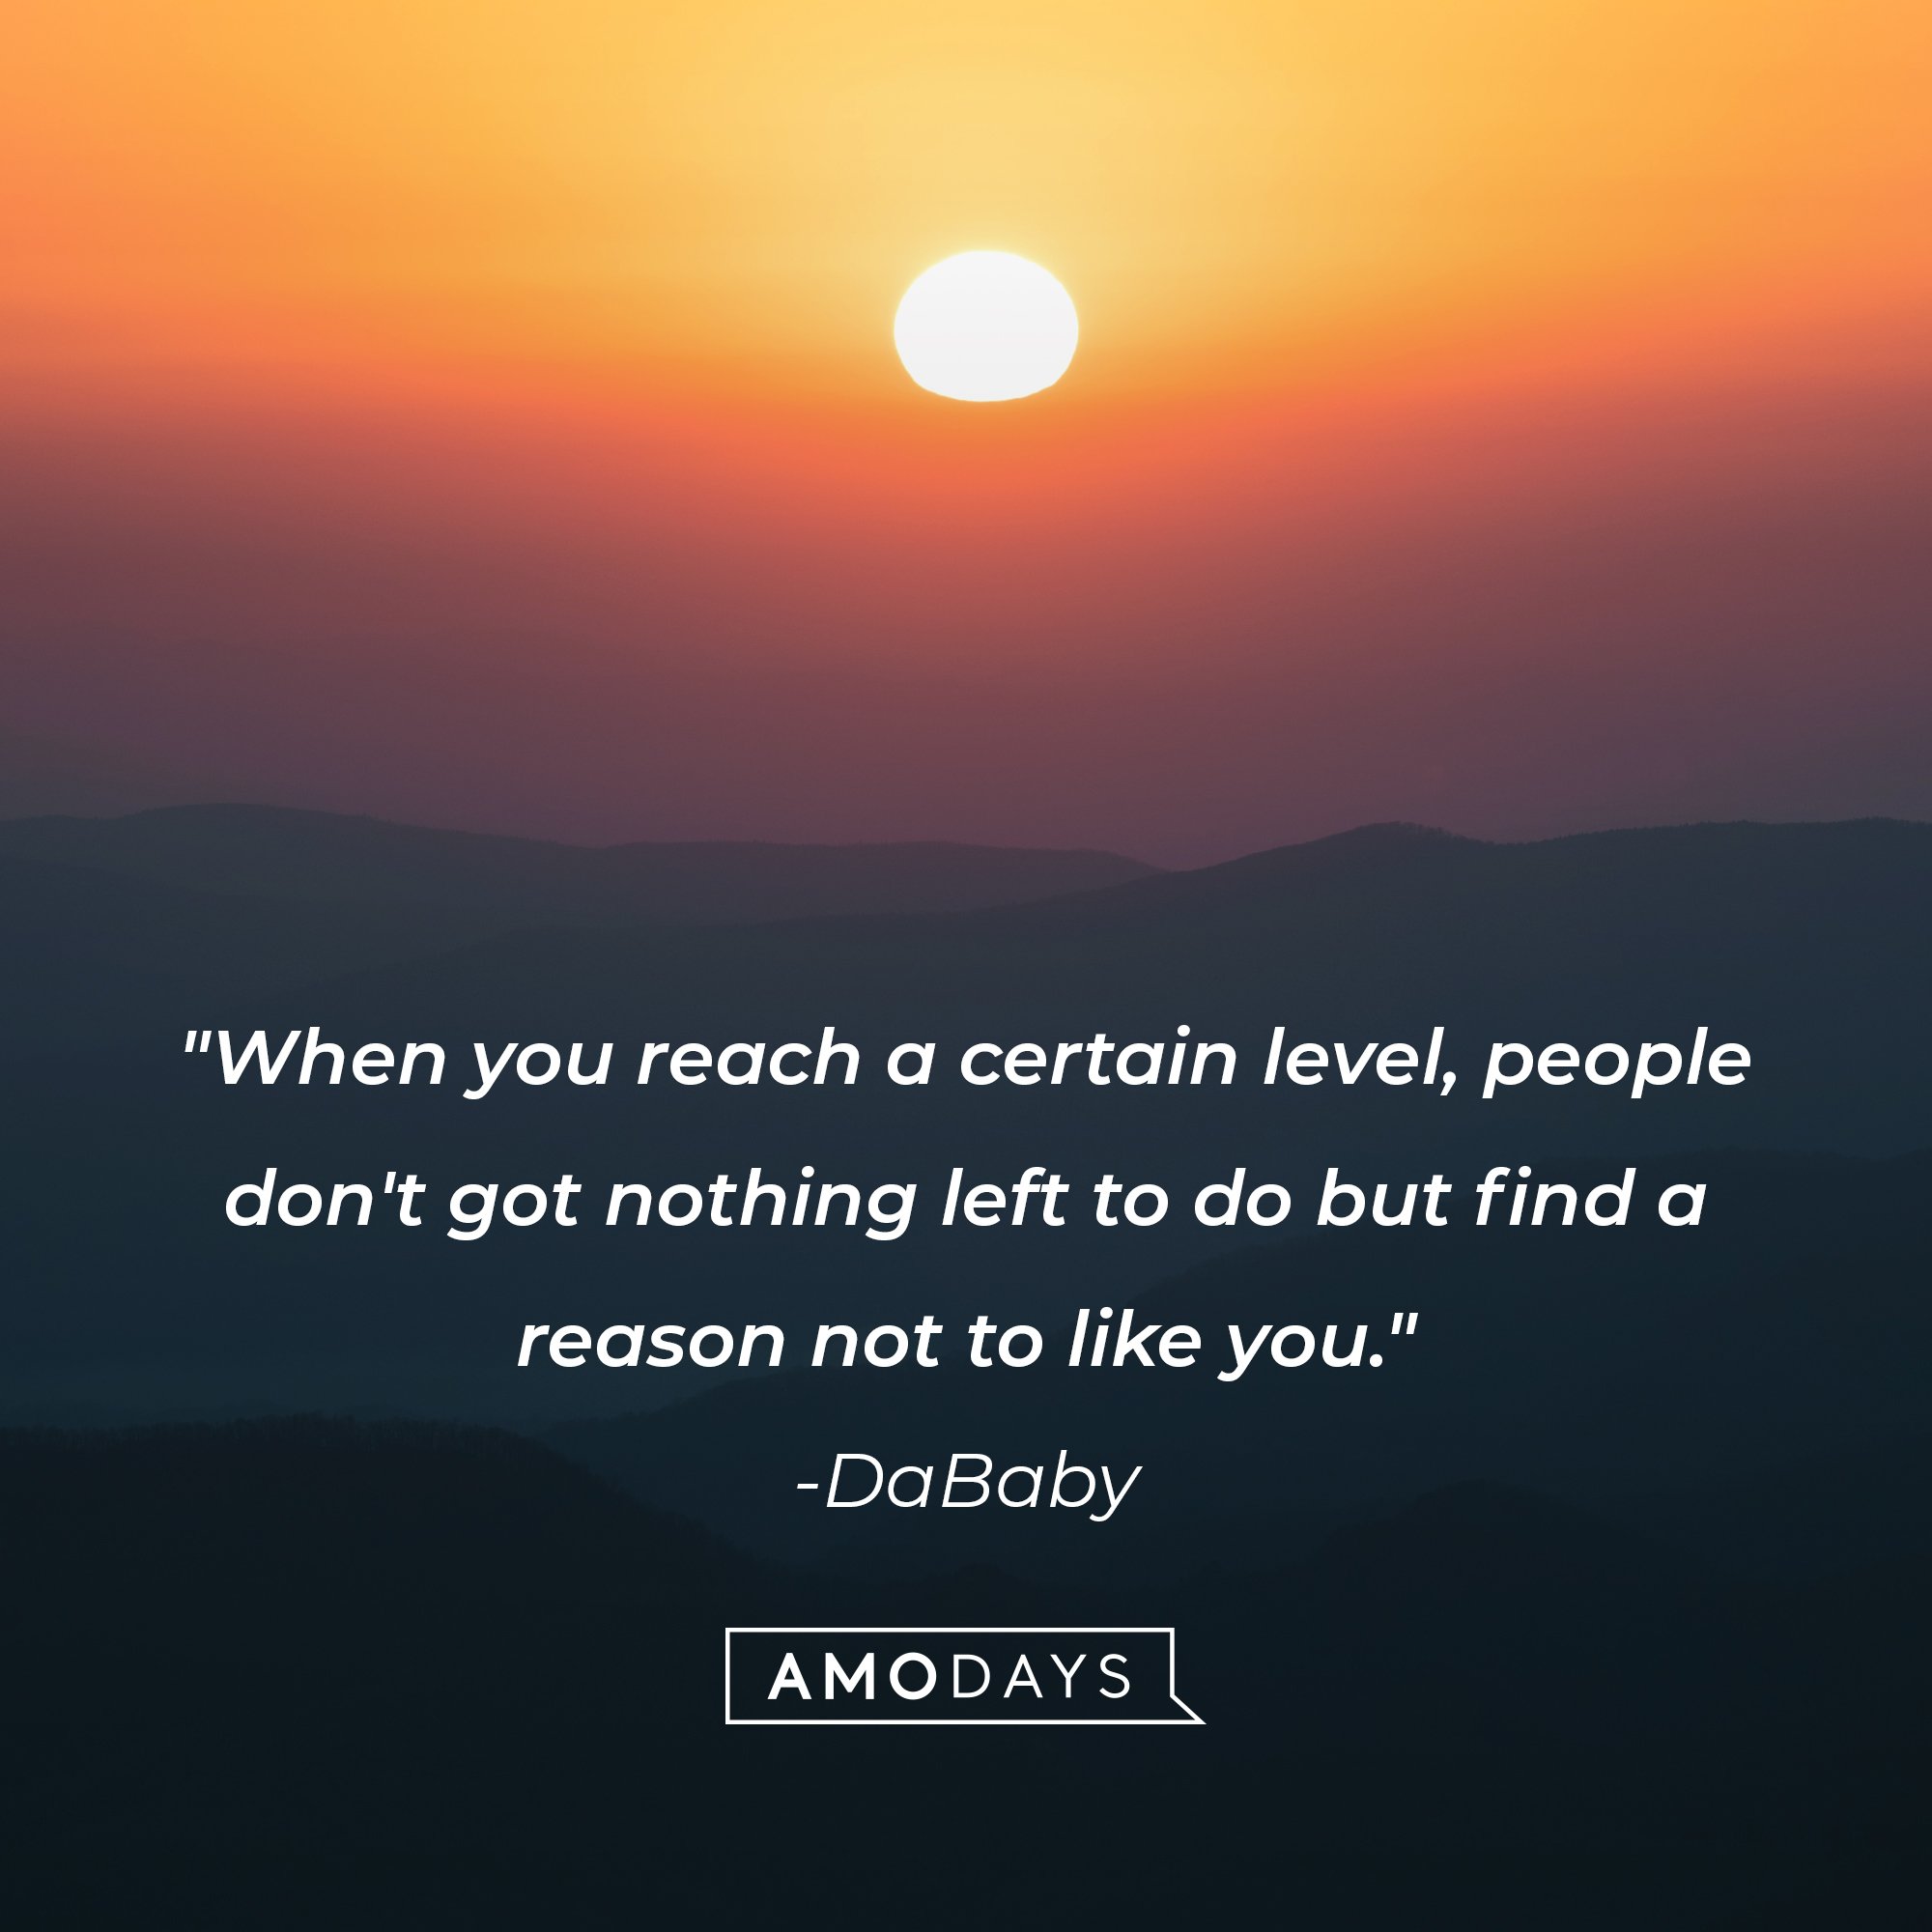 DaBaby‘s quote: "When you reach a certain level, people don't got nothing left to do but find a reason not to like you." | Image: AmoDay